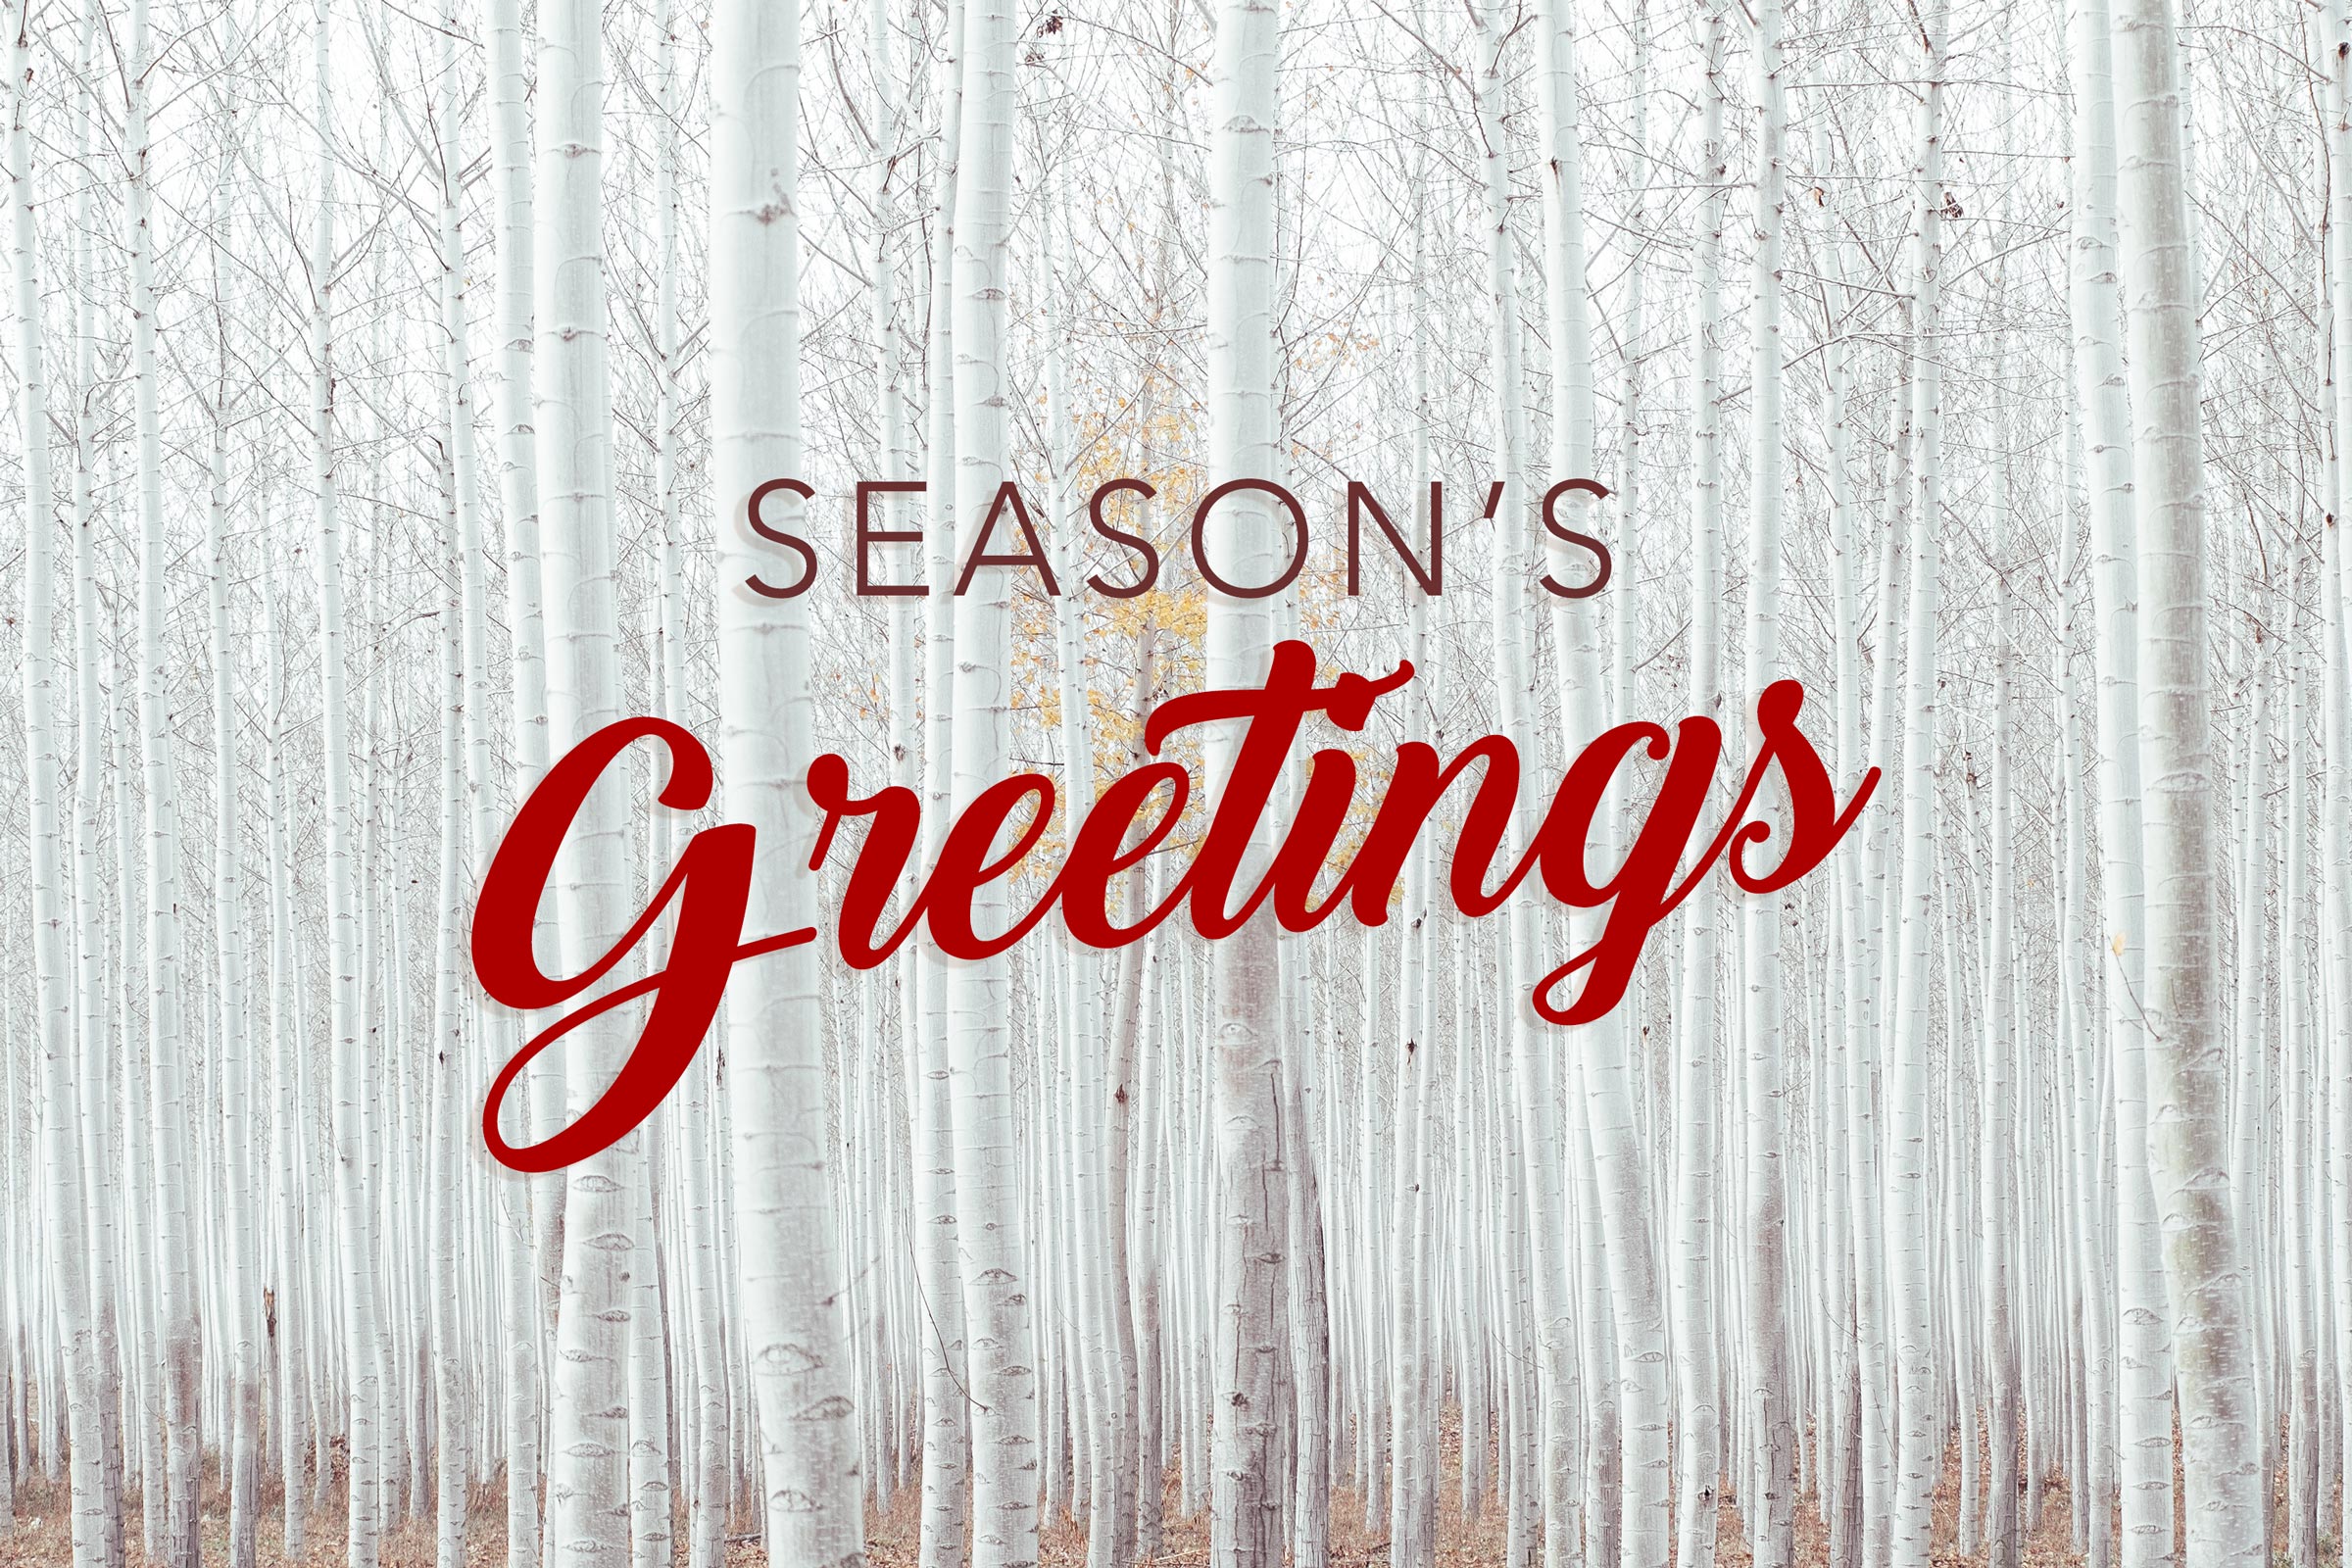 Free download 15 Seasons Greetings Cards Stock Images HD 2400x1600